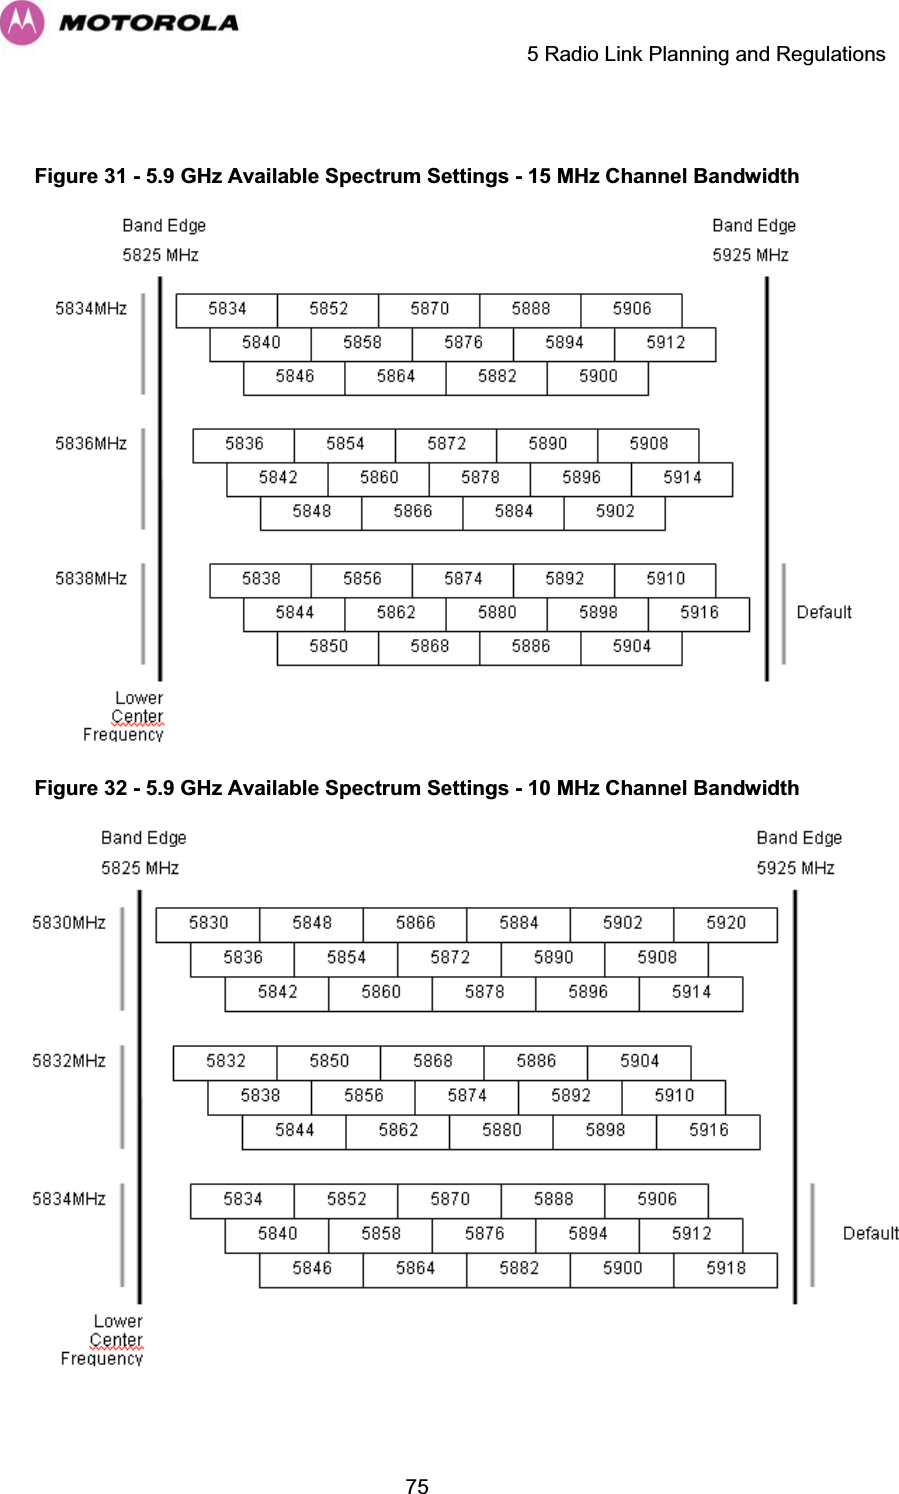     5 Radio Link Planning and Regulations  75 Figure 31 - 5.9 GHz Available Spectrum Settings - 15 MHz Channel Bandwidth  Figure 32 - 5.9 GHz Available Spectrum Settings - 10 MHz Channel Bandwidth   